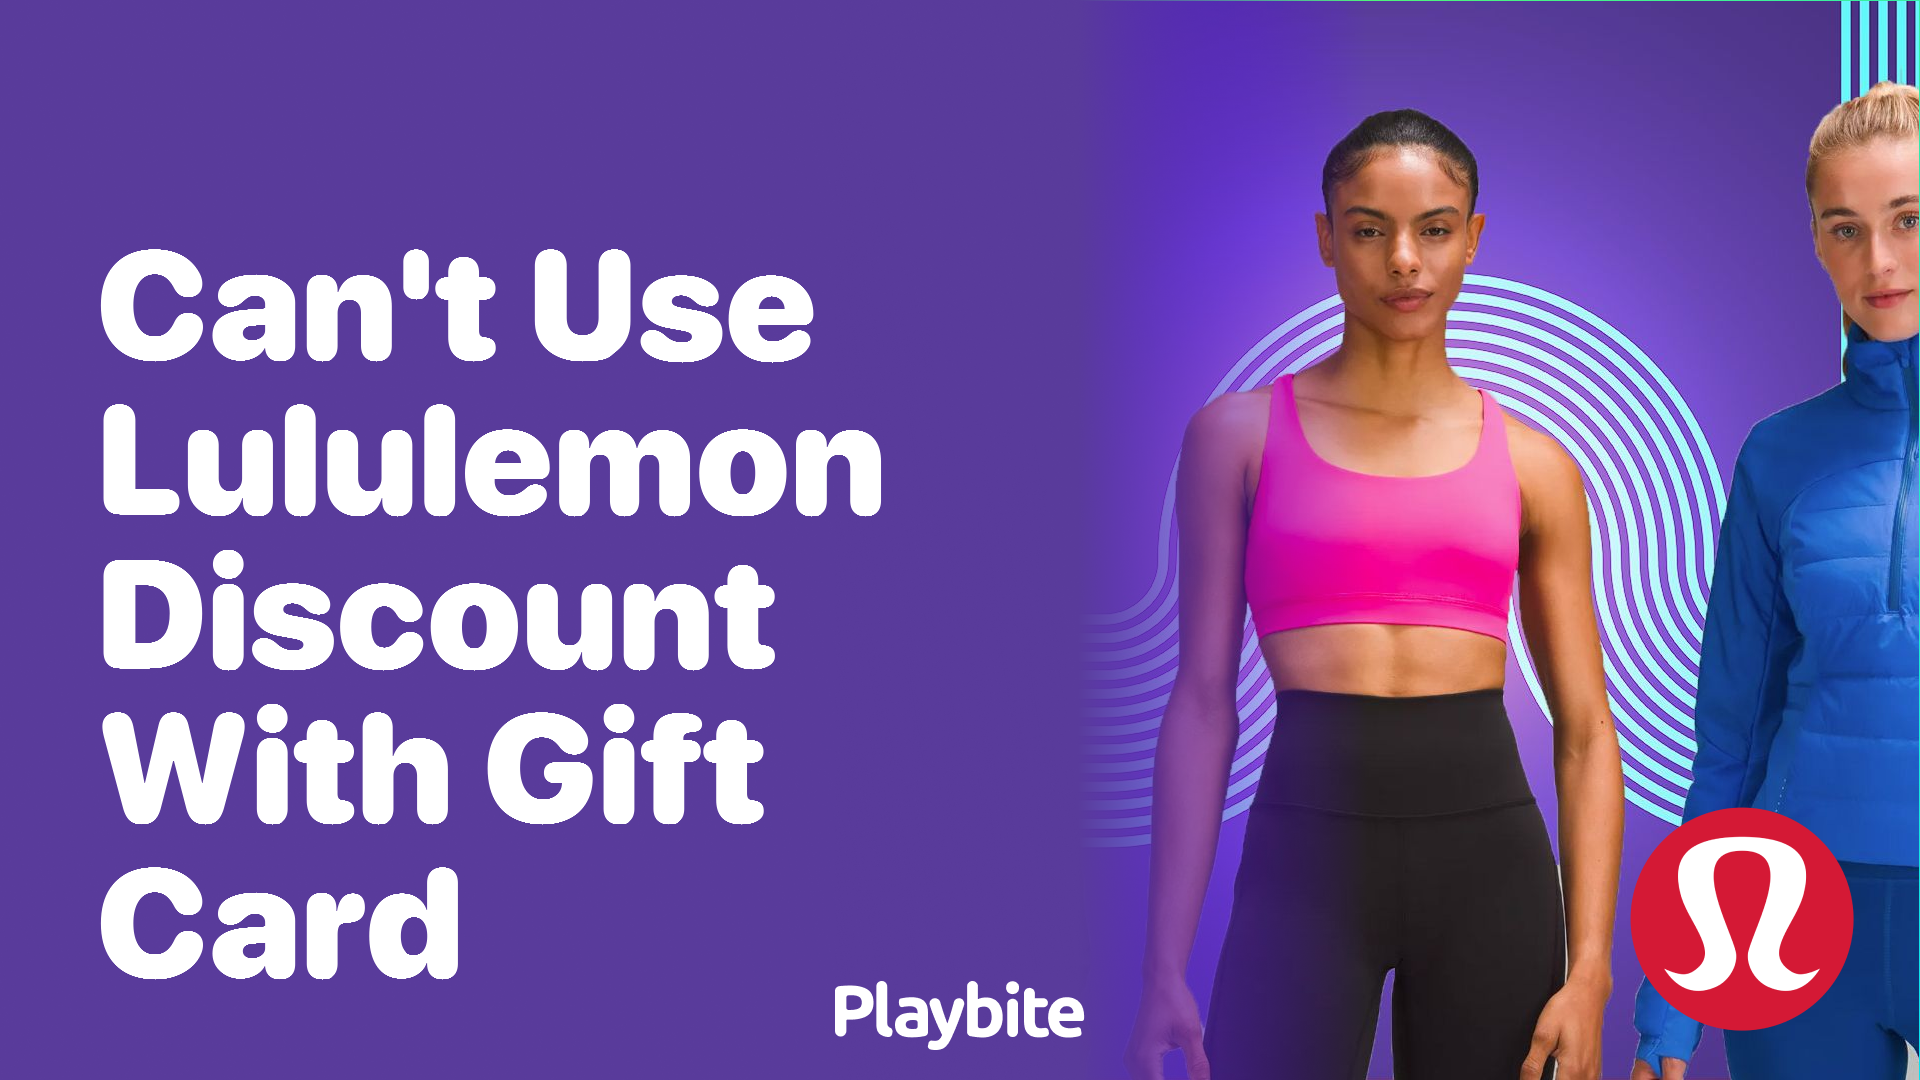 Can't Use Lululemon Discount With Gift Card? Here's What You Need